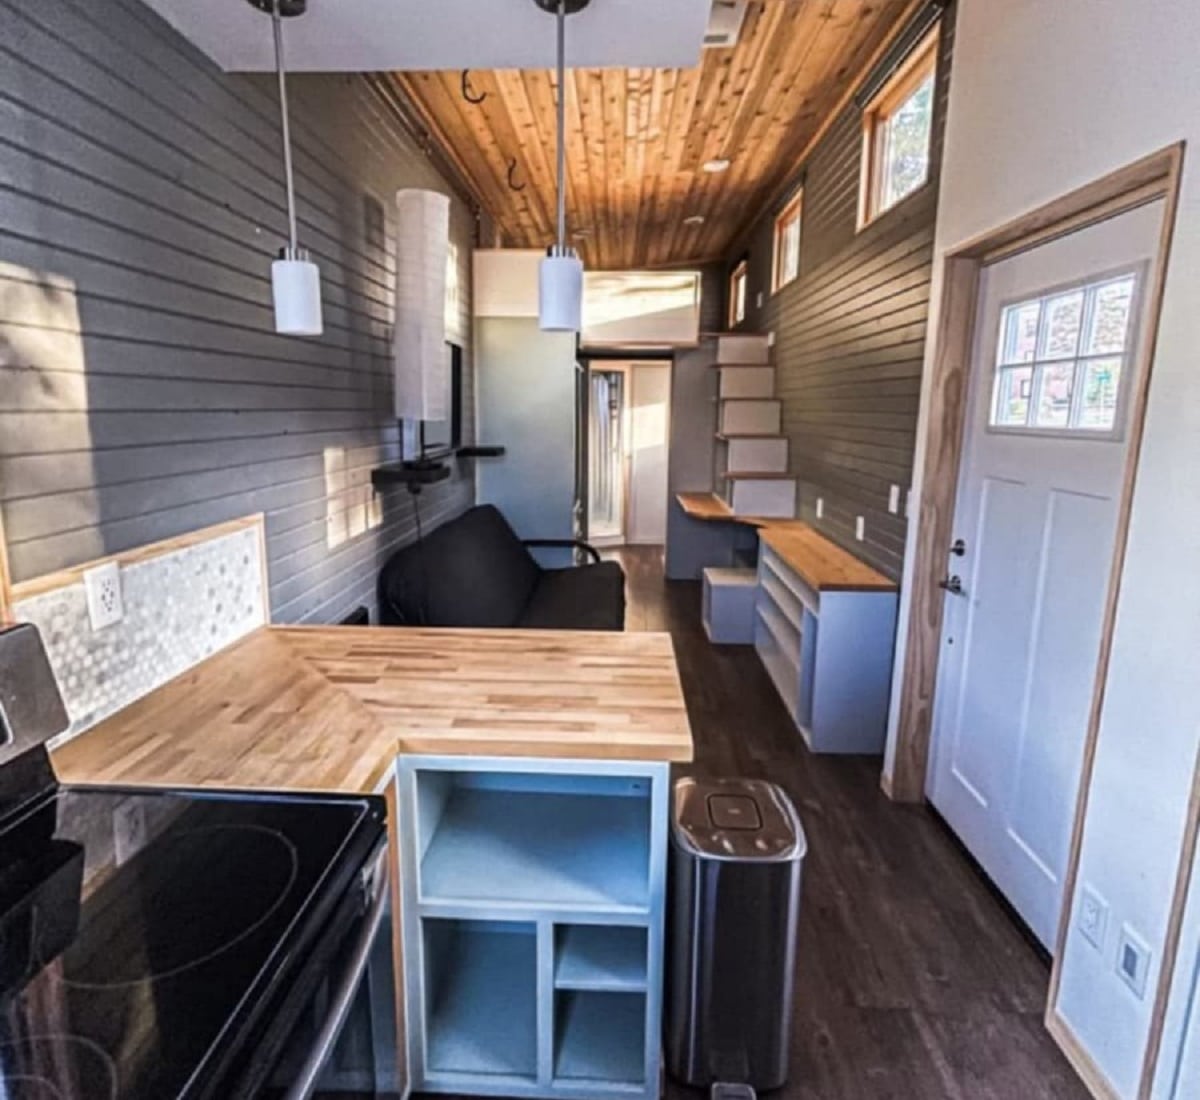 Handcrafted Tiny House Interior